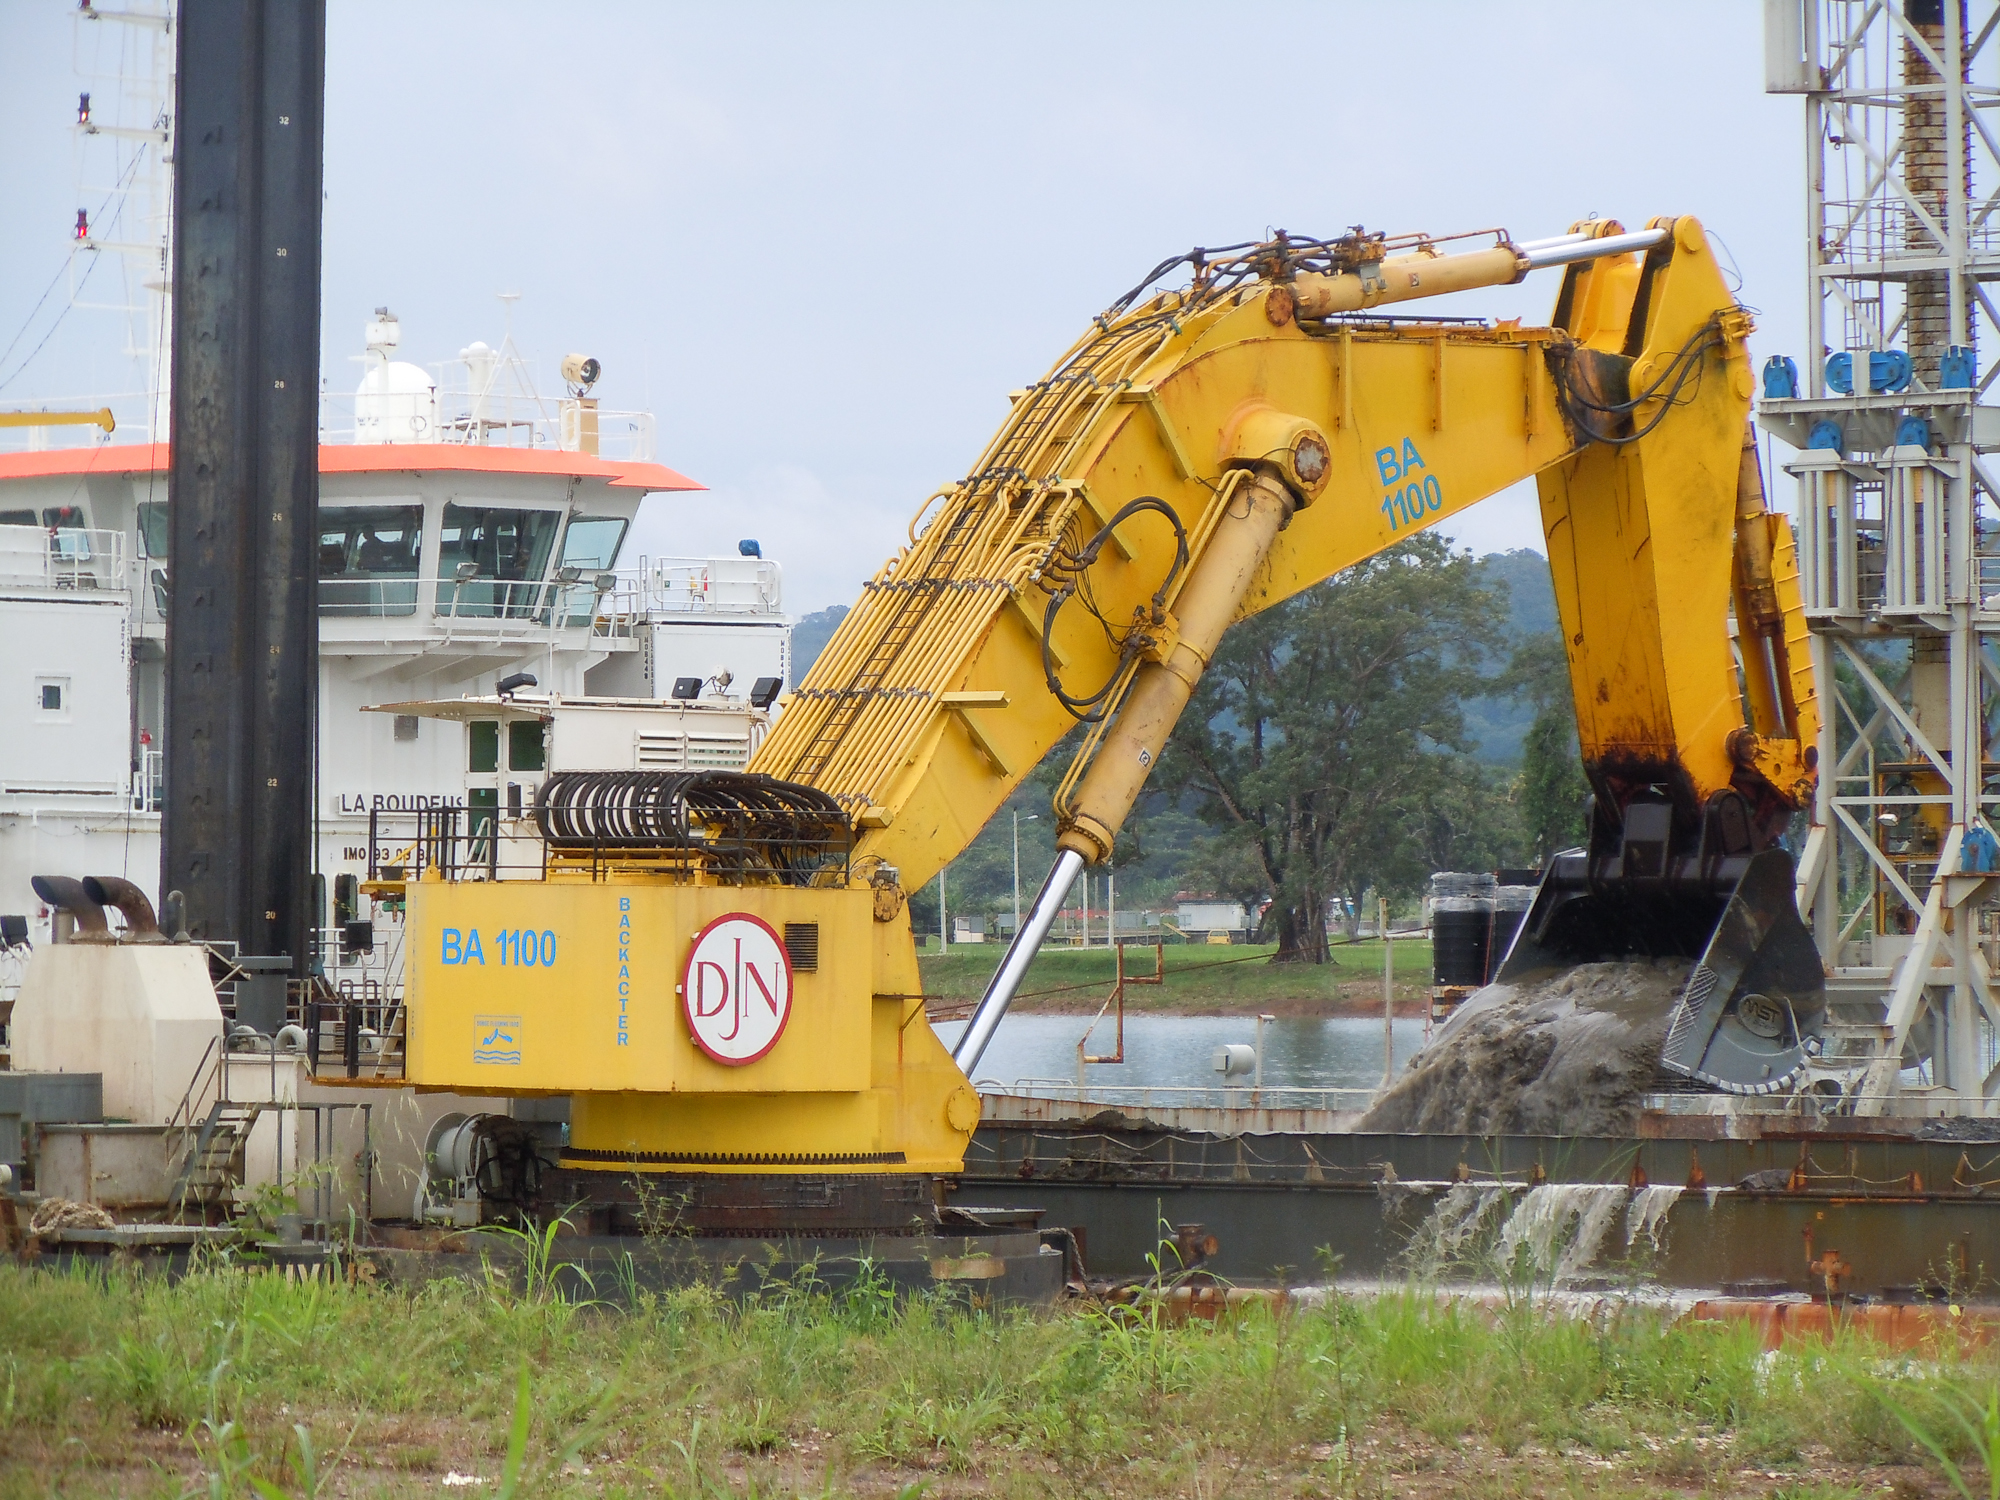 Dredging Activity along the Panama Canal